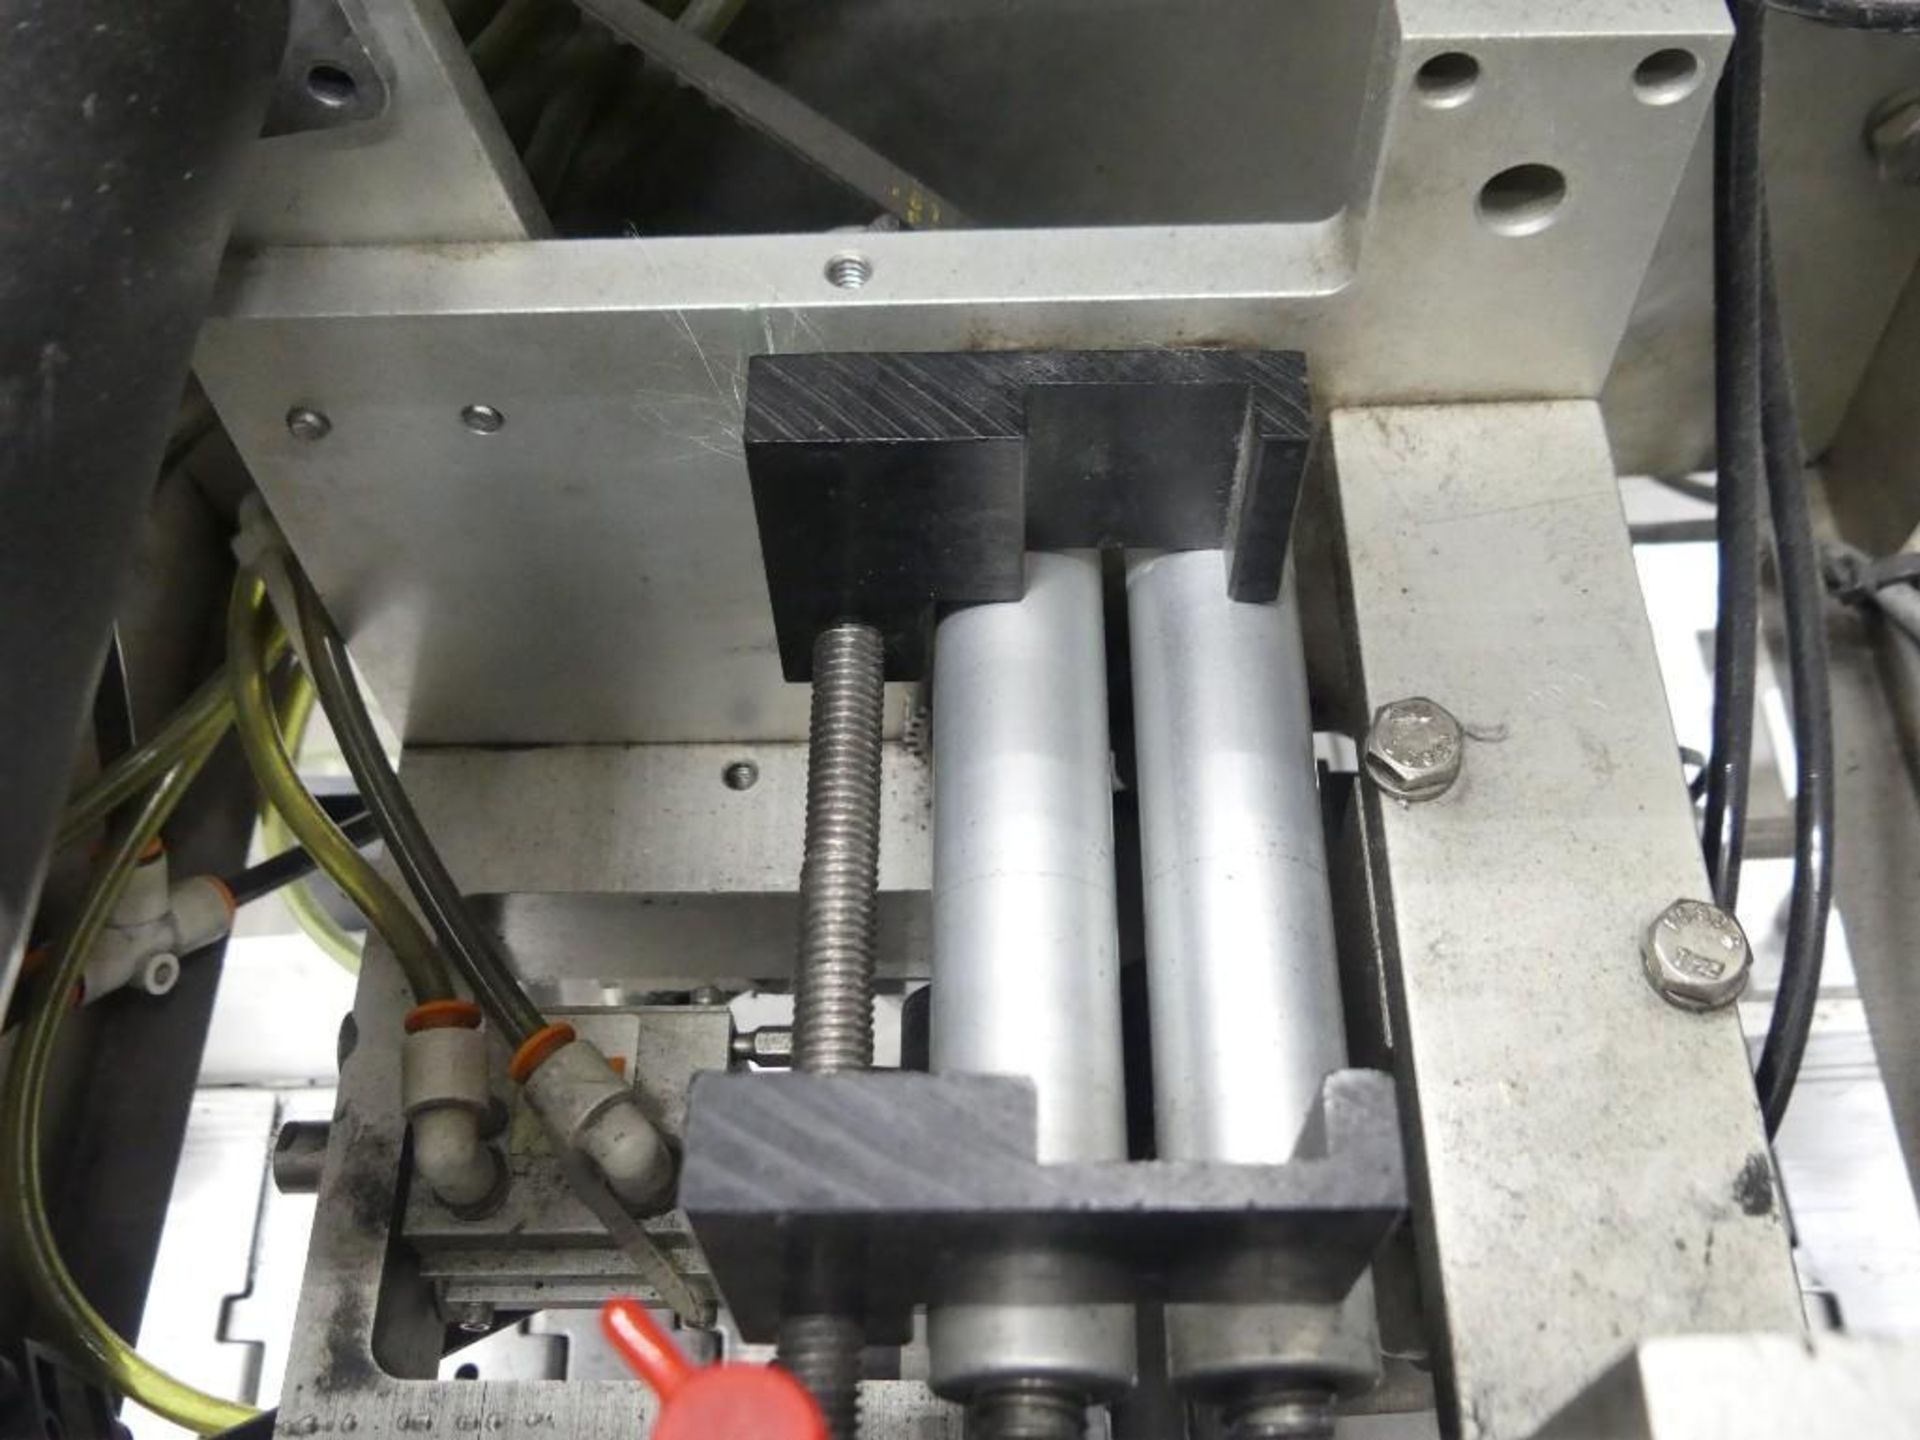 Axon EZ-100 Stainless Steel Sleeve Applicator with Marburg Industries Heat Tunnel - Image 25 of 41